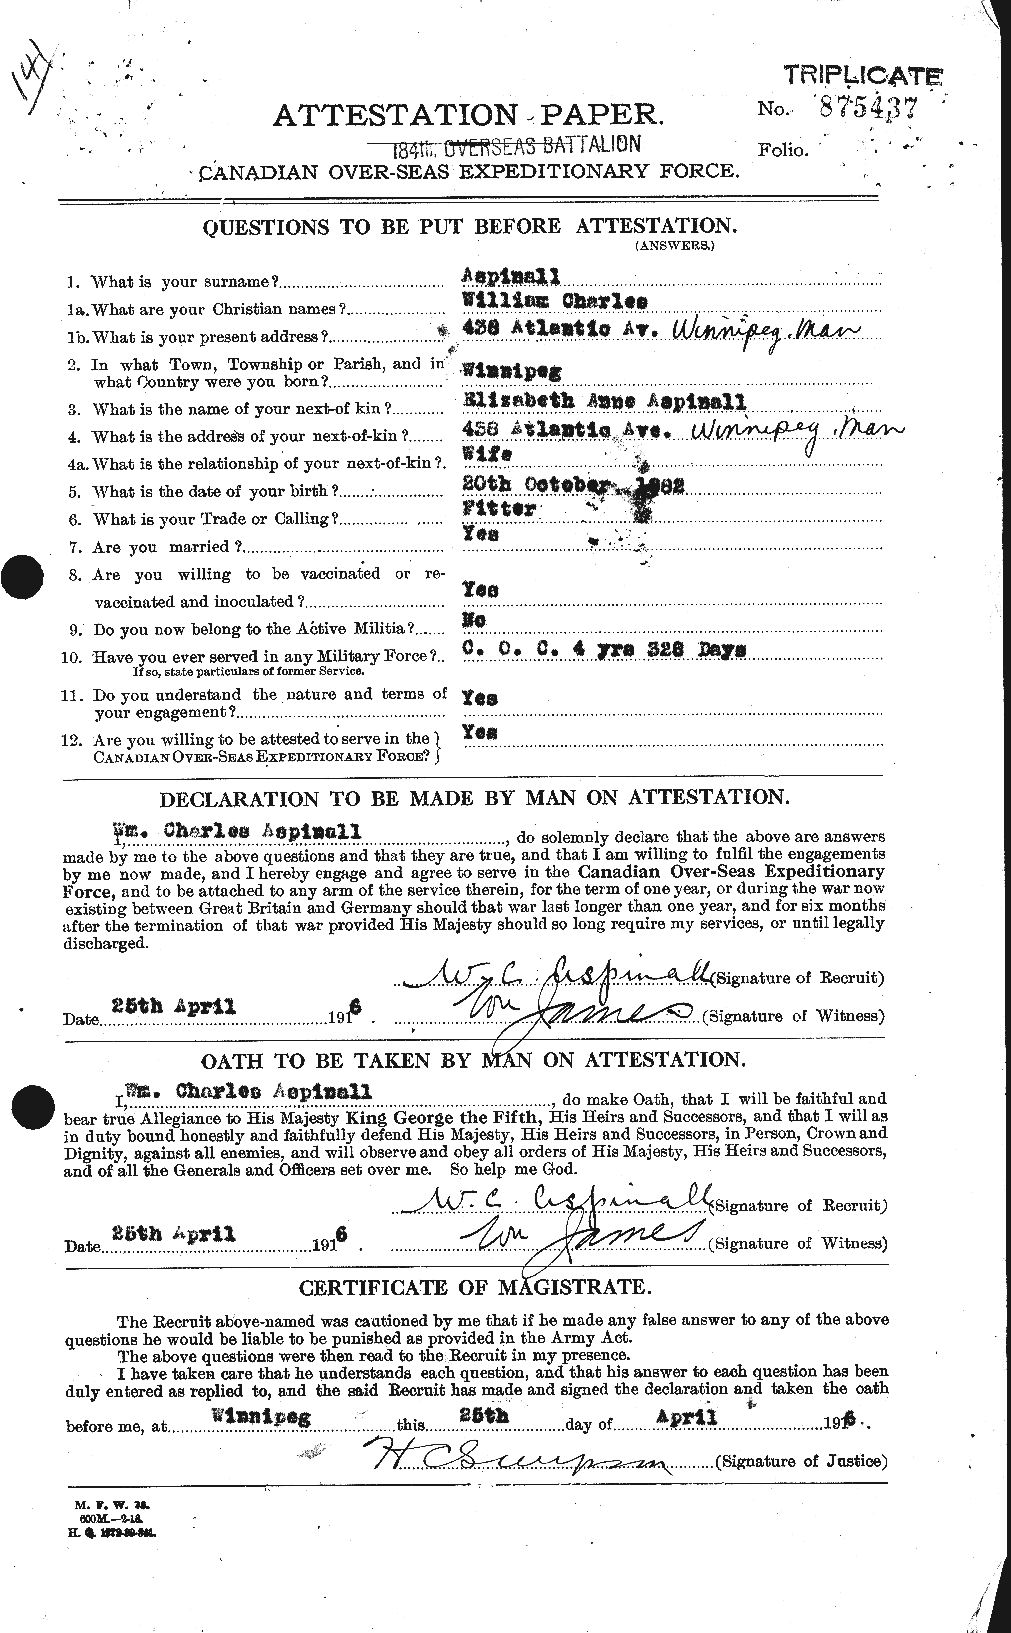 Personnel Records of the First World War - CEF 223558a